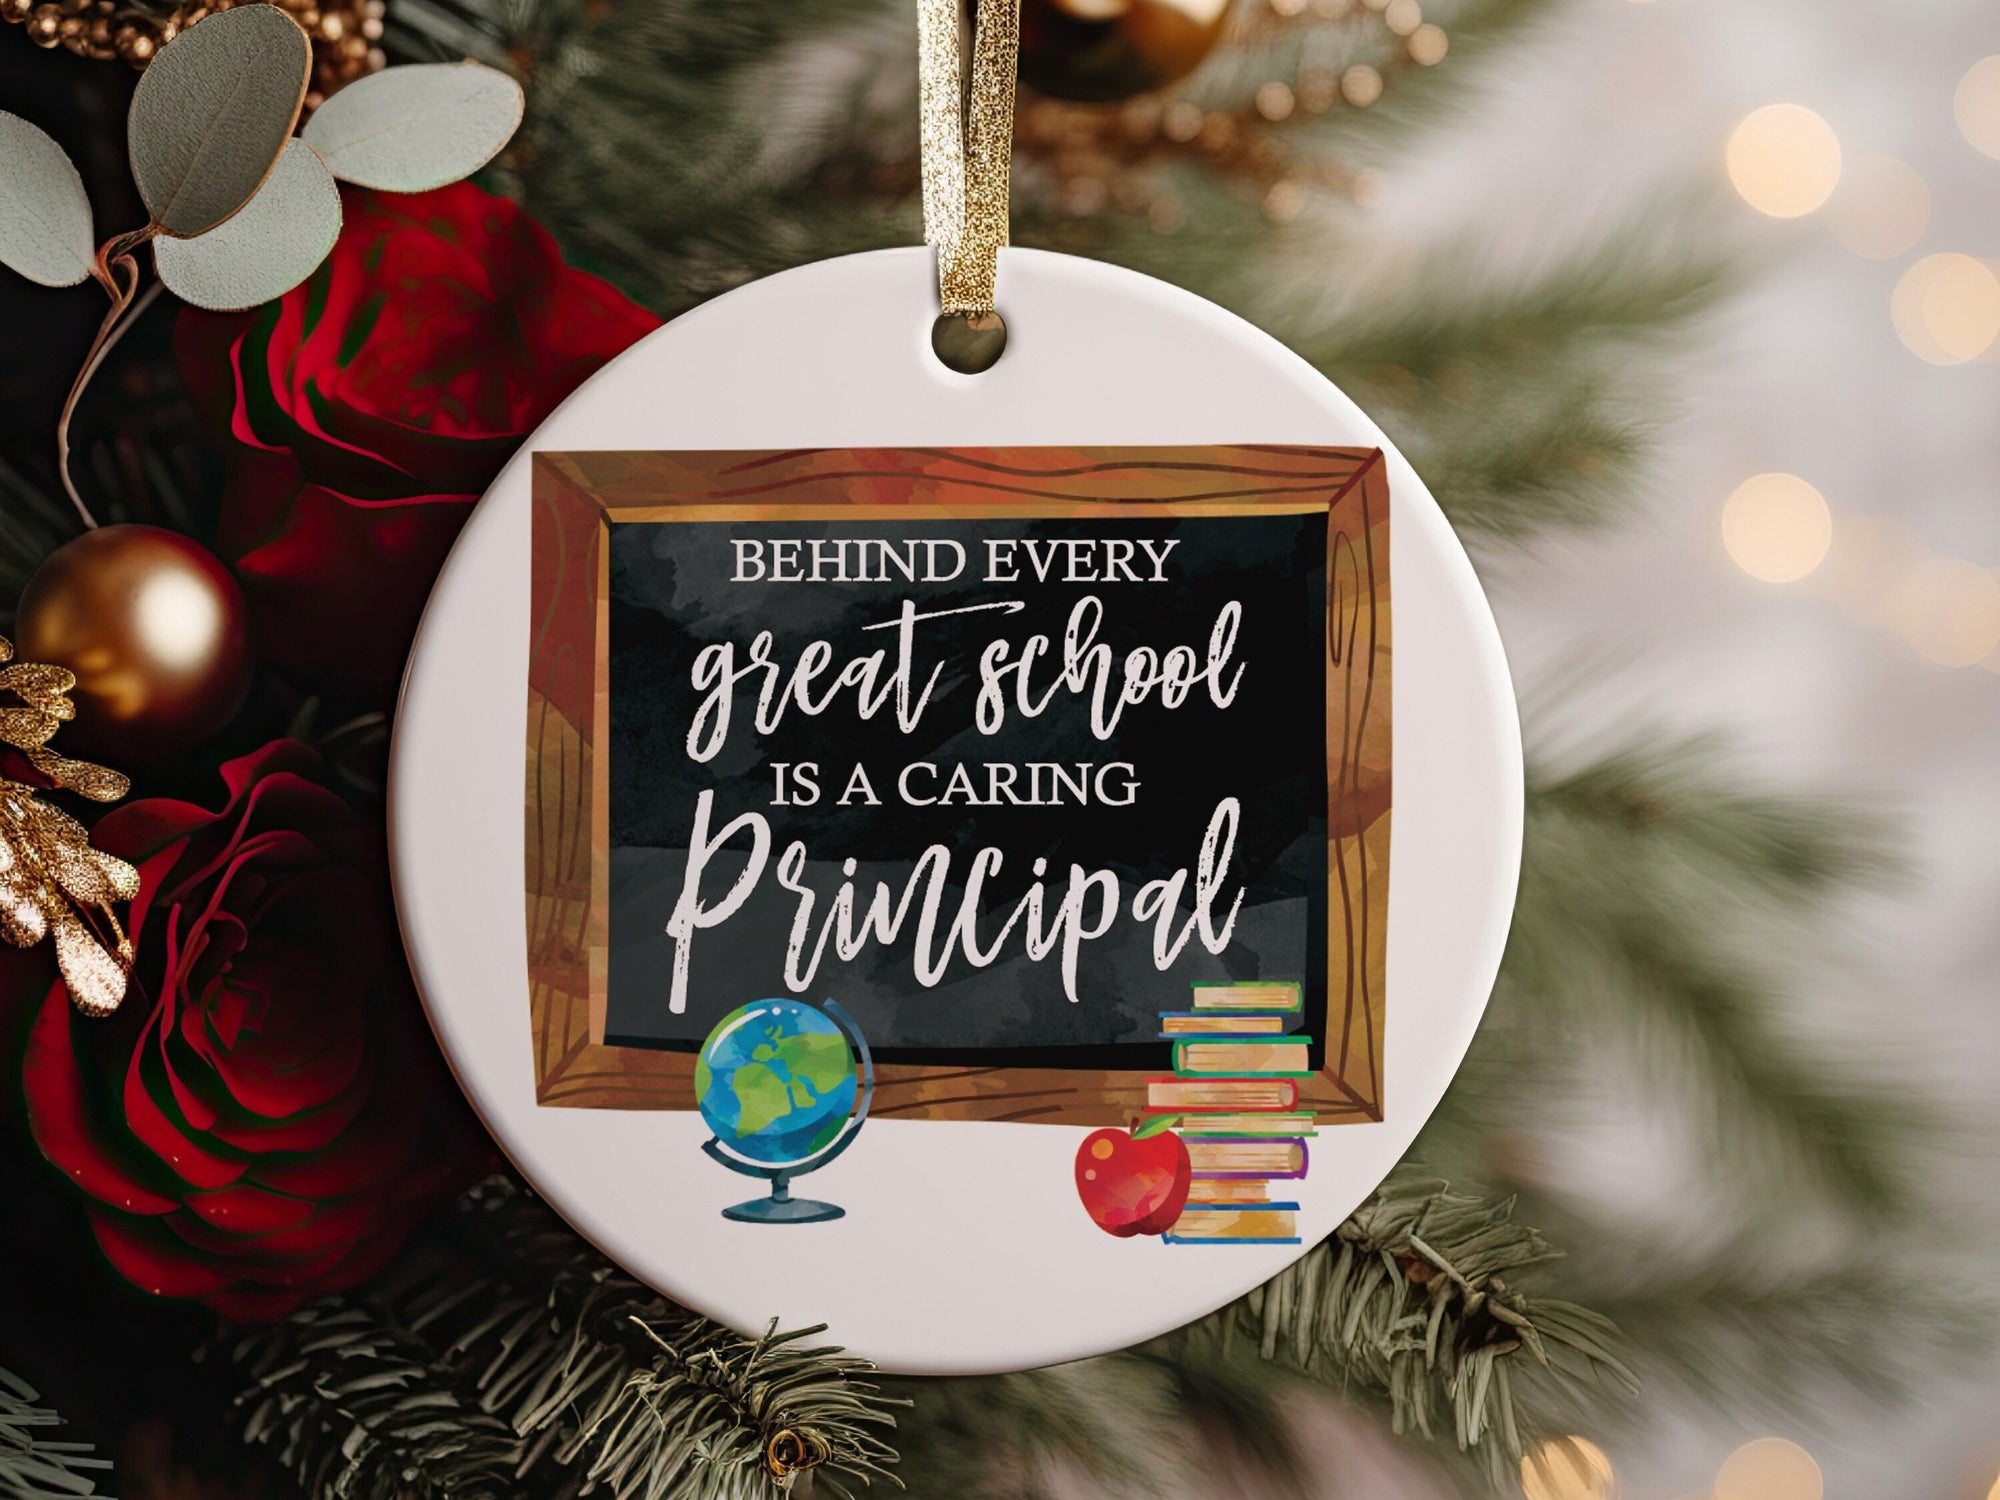 Best Principal Ever Behind Every Great School Is A Caring Principal Christmas Ornament, Educator or Instructor Gift Appreciation